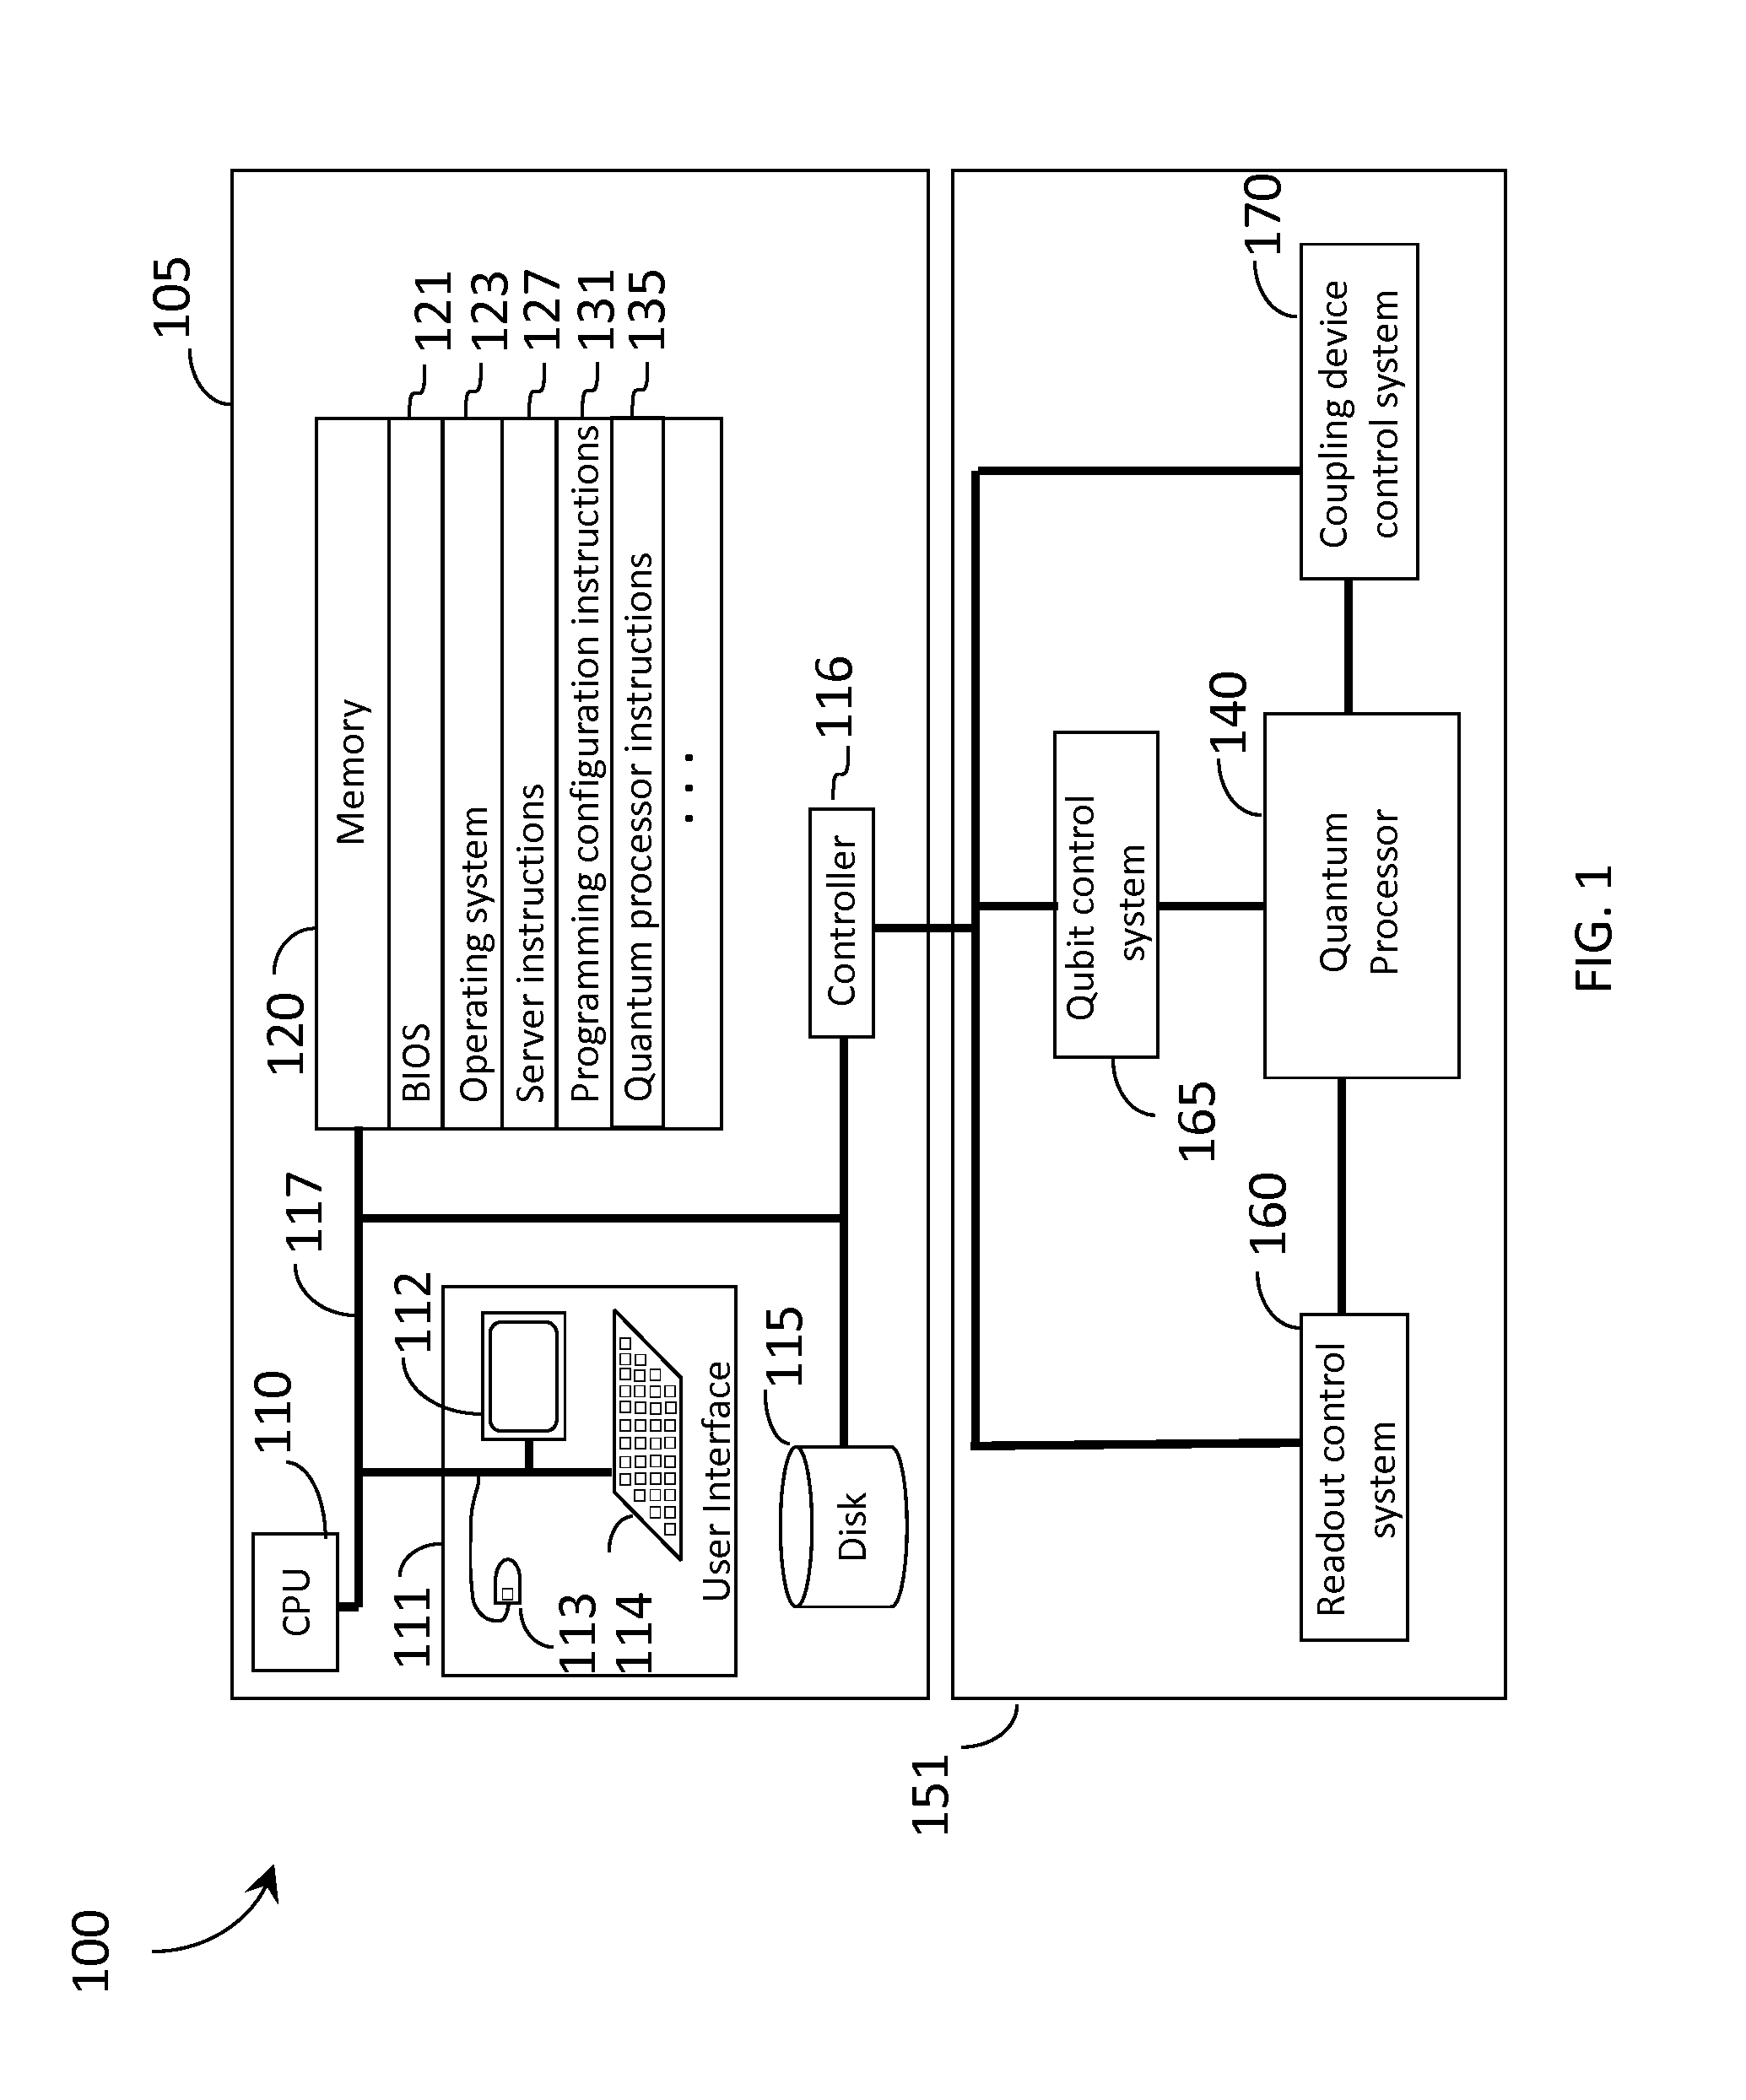 Systems and devices for quantum processor architectures